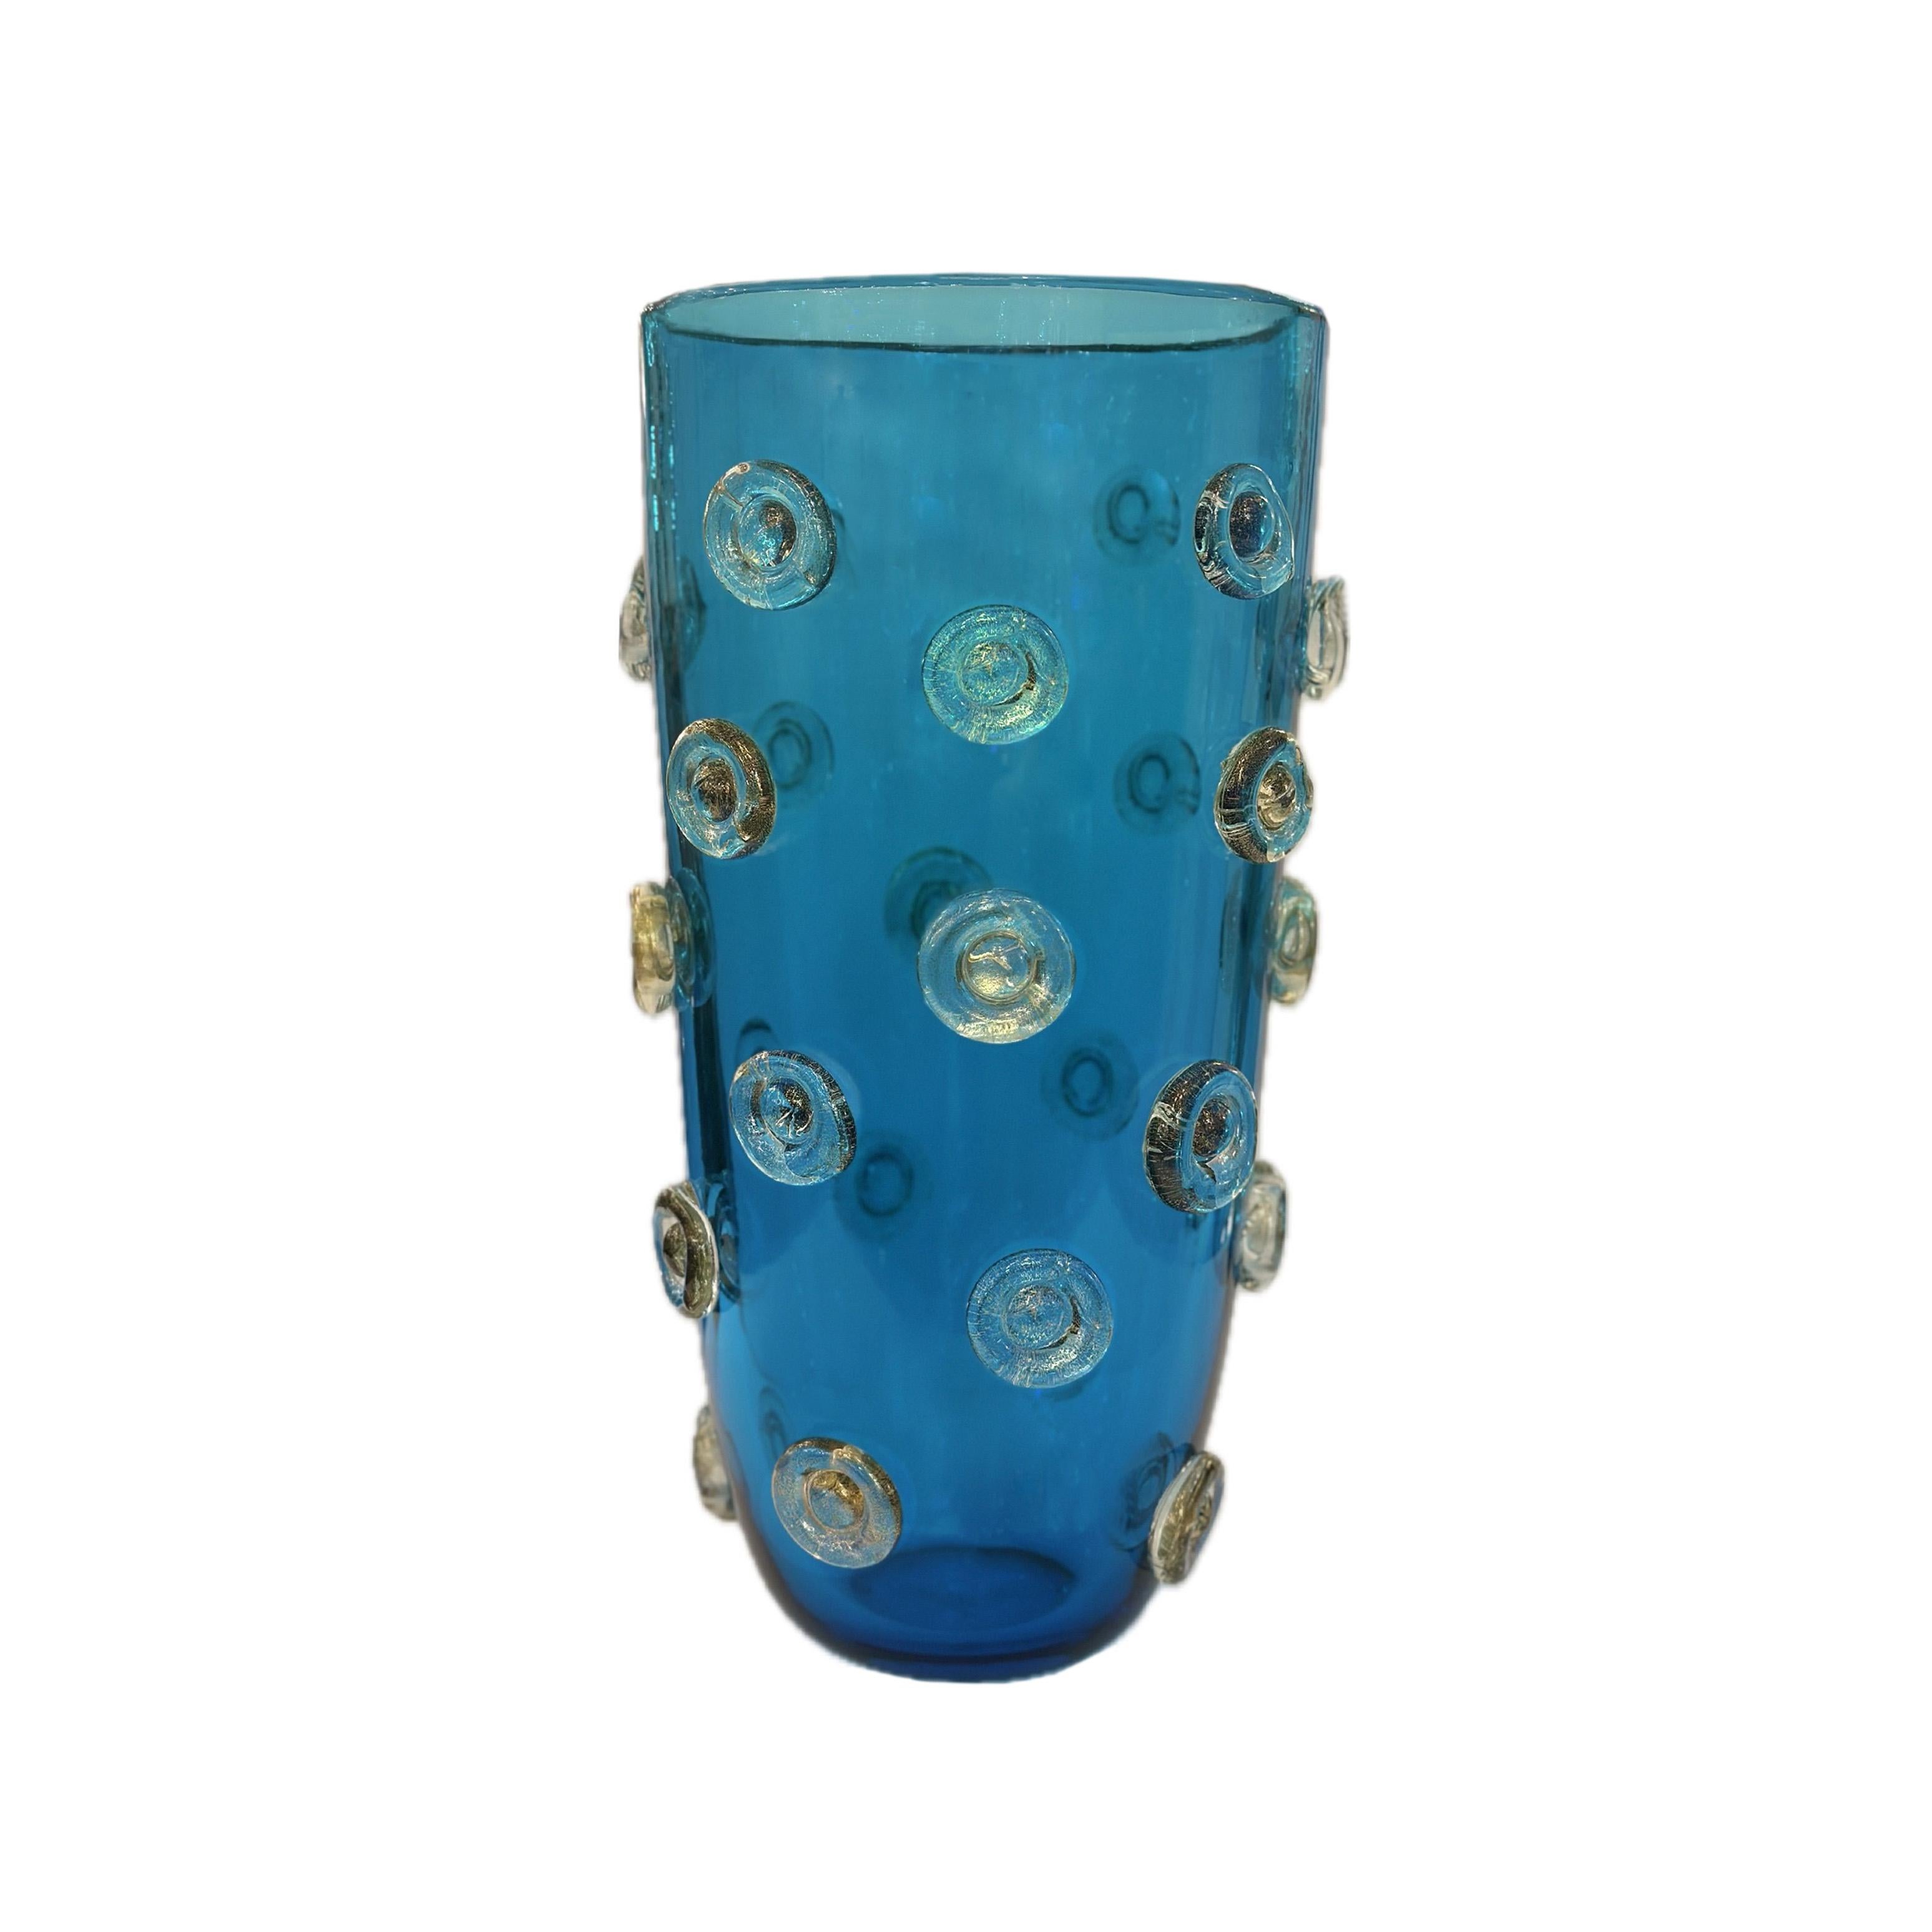 Deep blue color Murano glass vase decorated with applied dot design in clear glass with gold leaf inclusions. Italy, 2023

This vase is currently available  in our NYC showroom. Thsi design is also available in Green and Amber color glass. Please